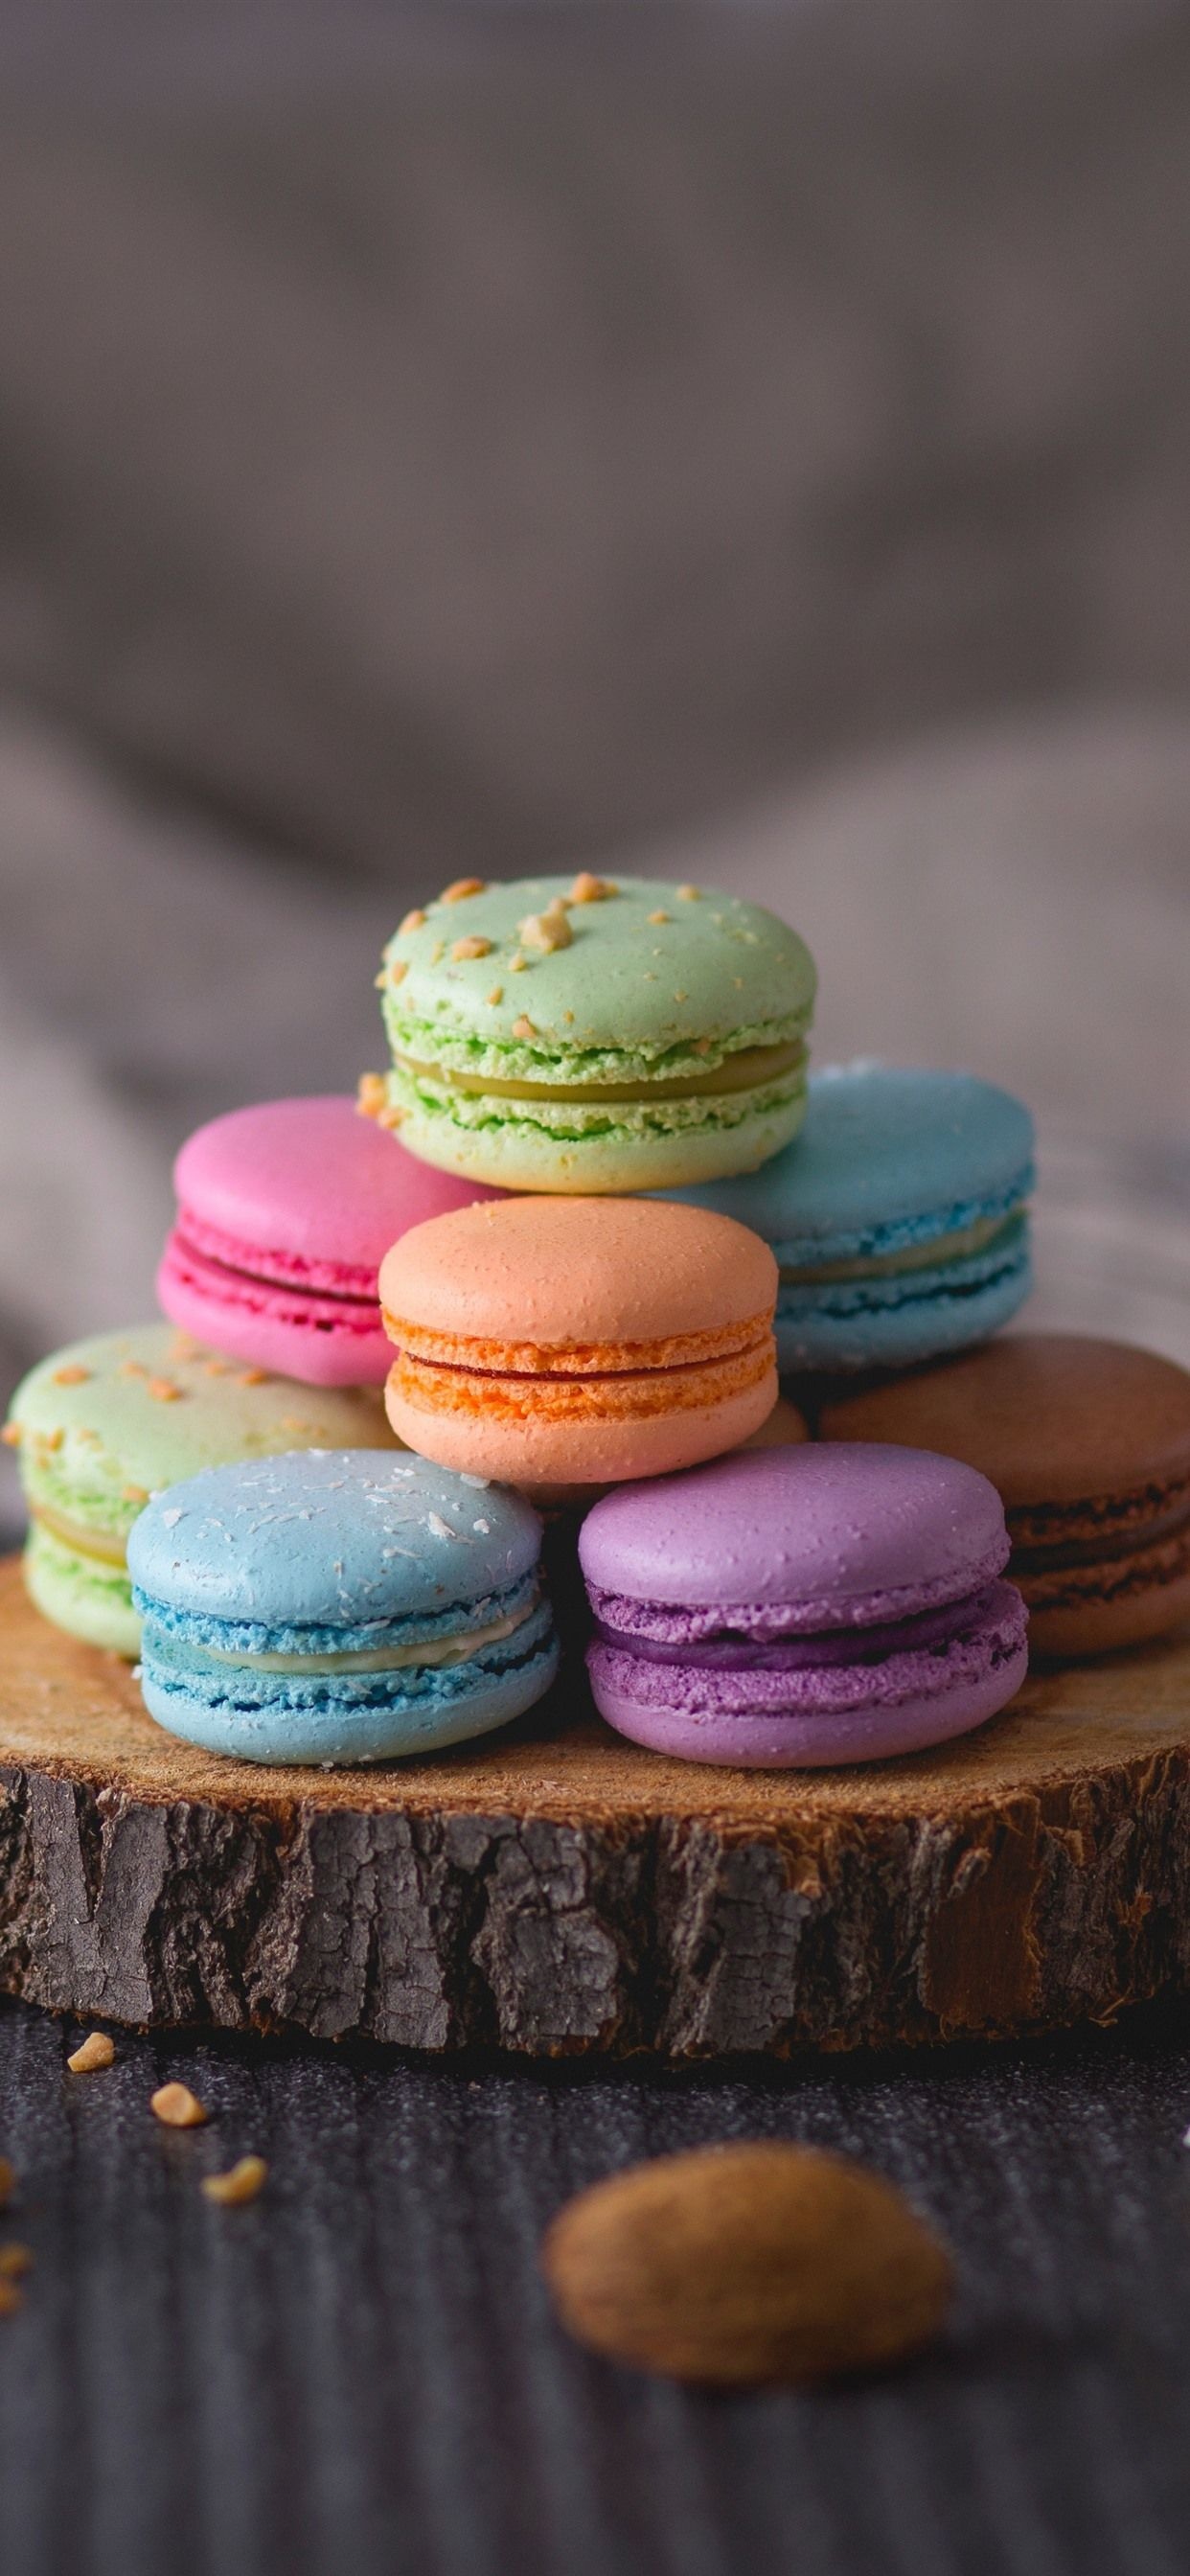 Macaron: Sandwiched together with a flavored buttercream or ganache filling. 1250x2690 HD Wallpaper.